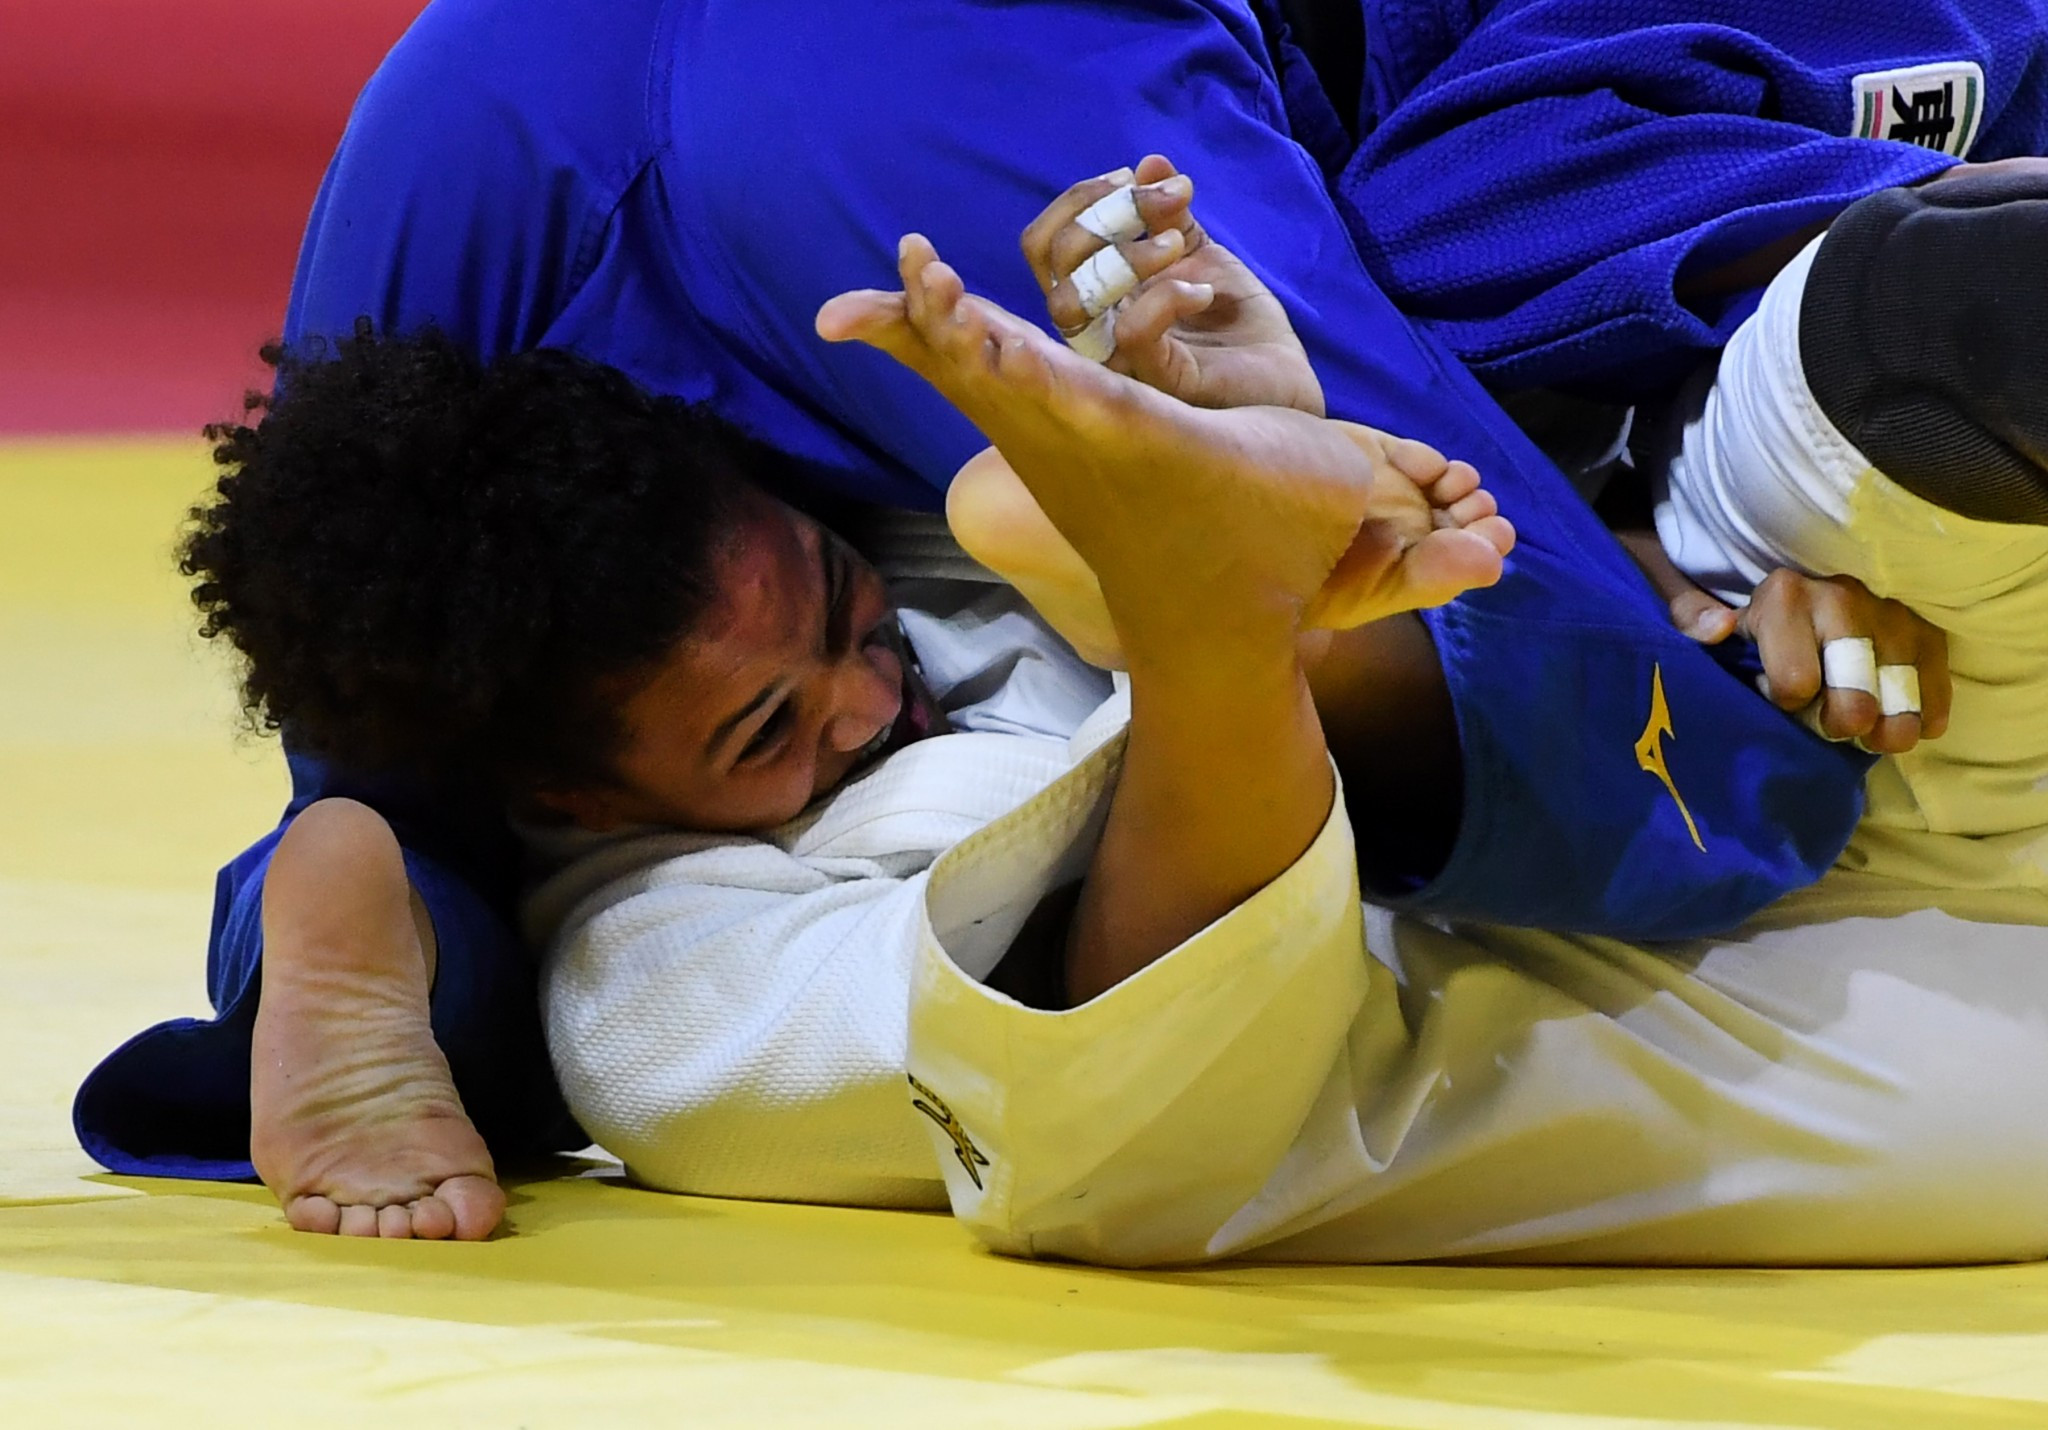 The Japanese judoka secured the under 70kg title with an ippon win over Puerto Rico's Maria Perez ©Getty Images